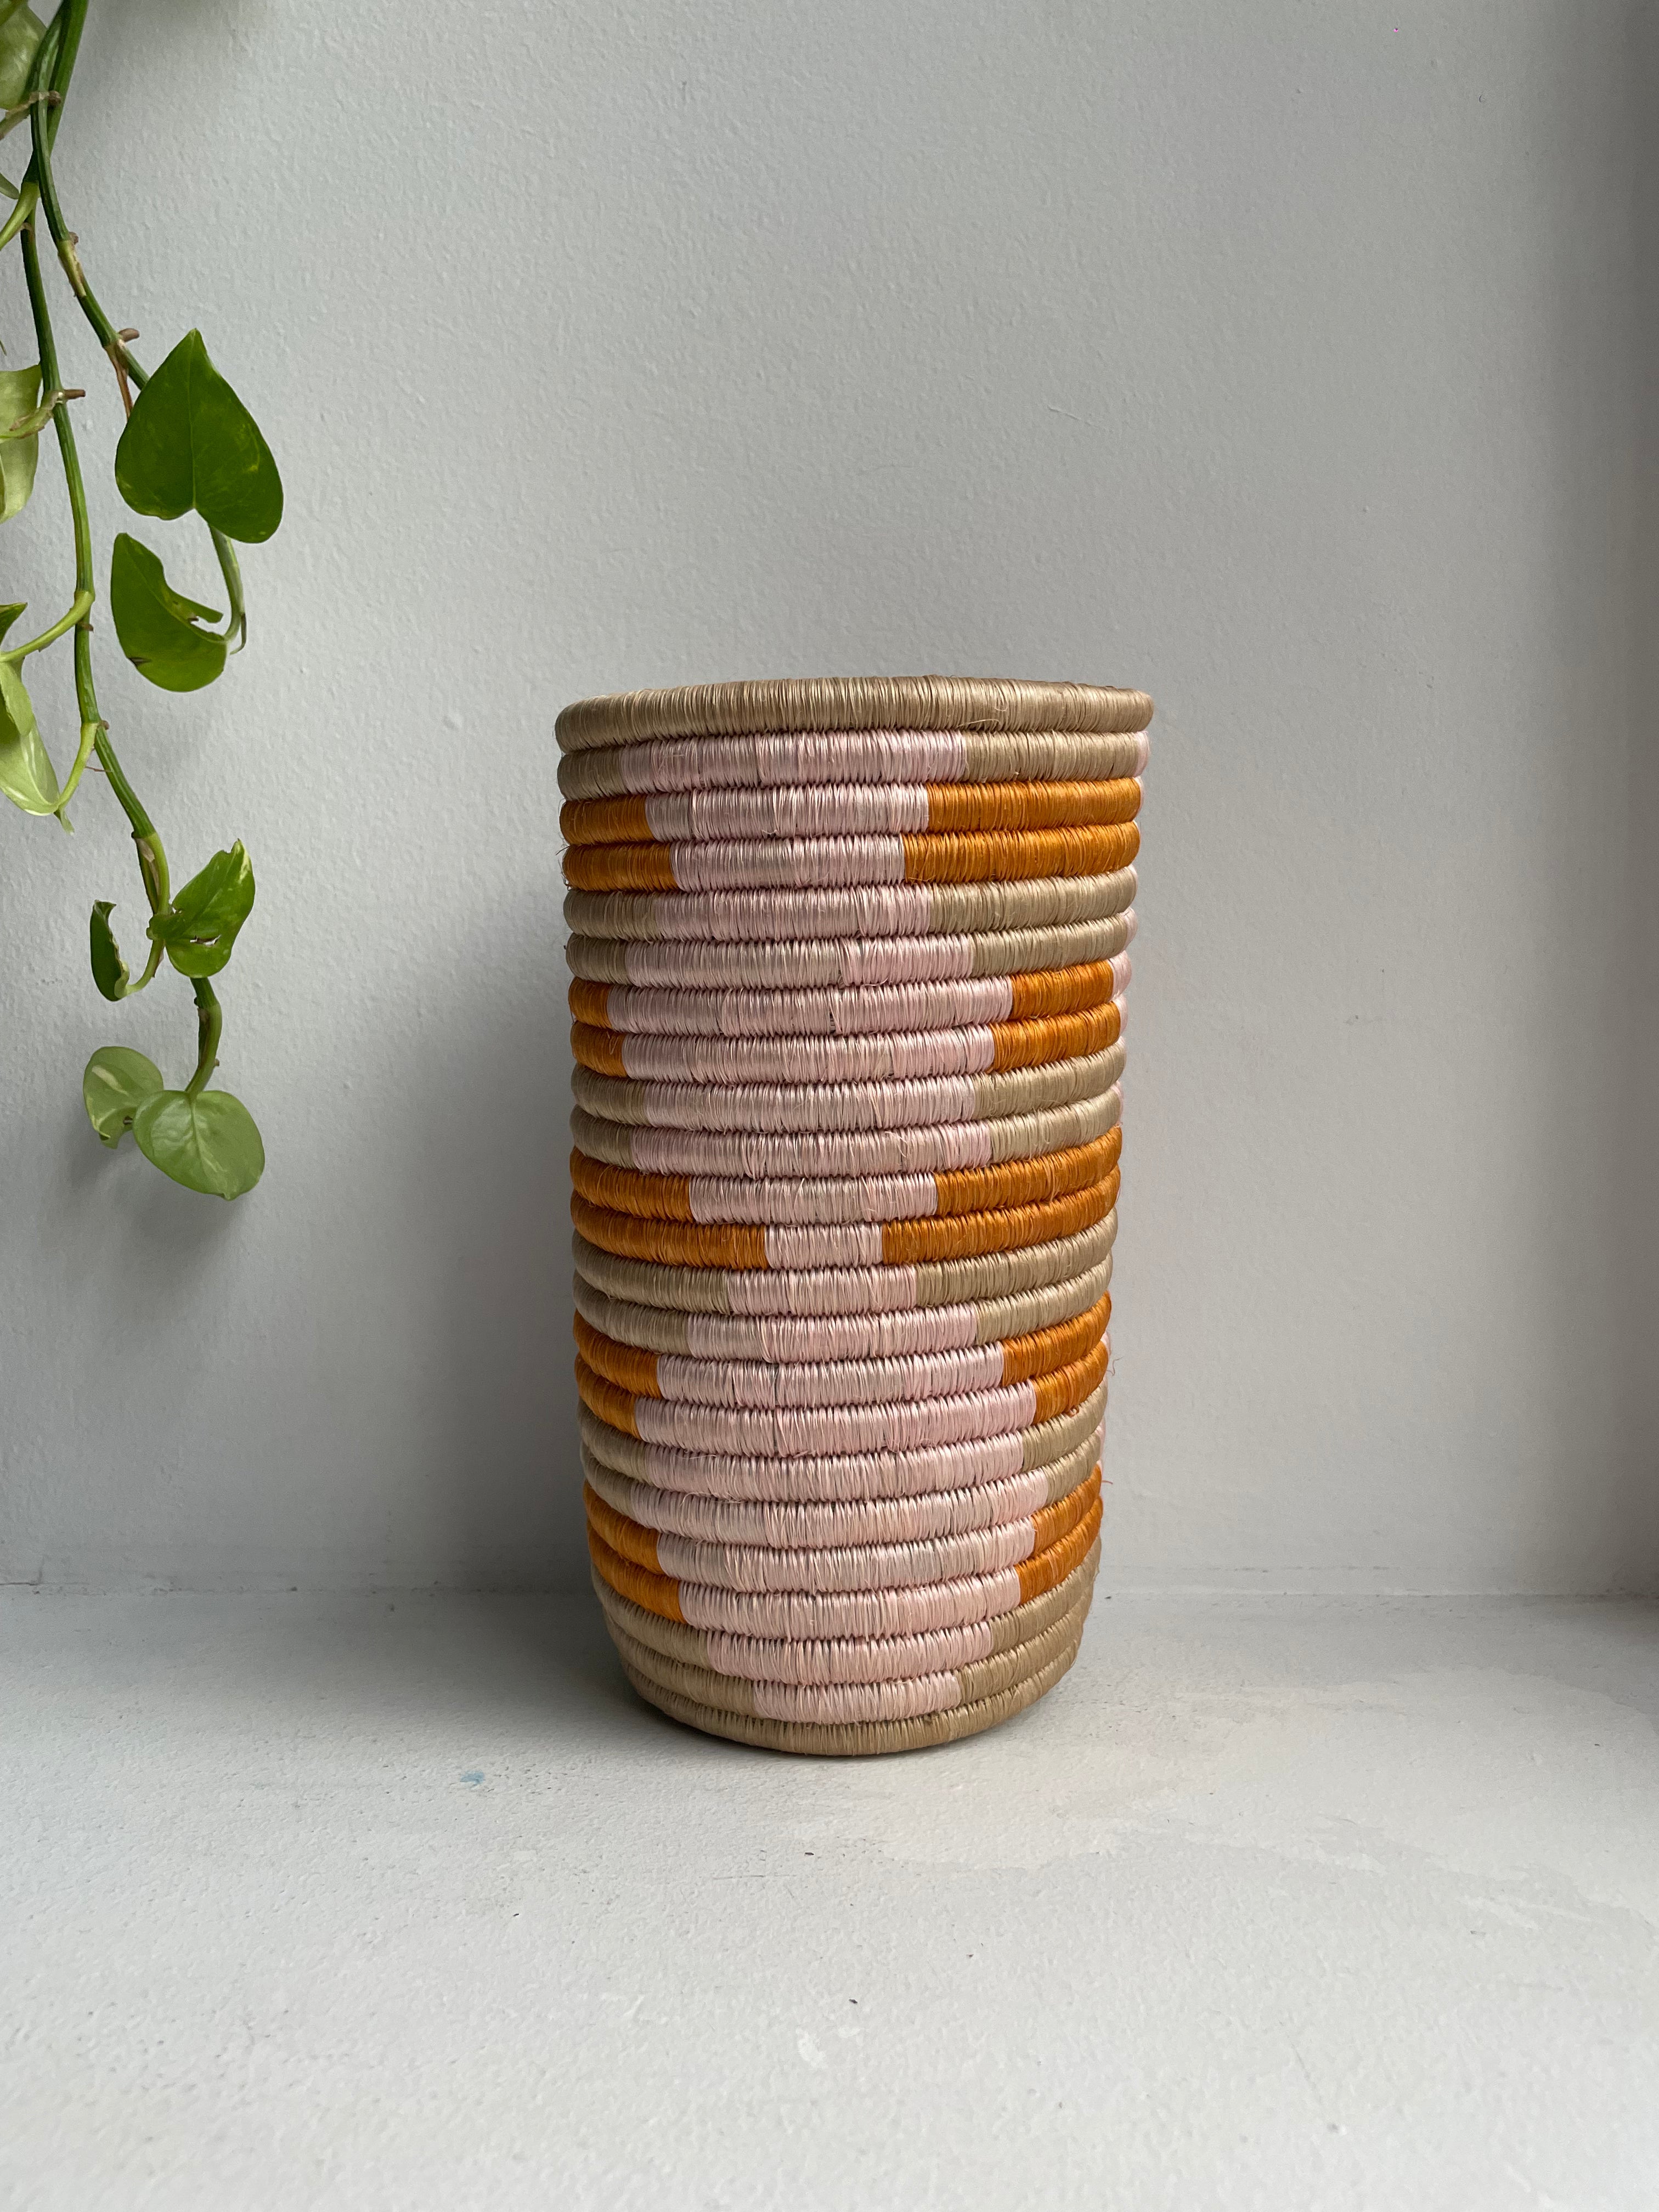 Display of bubble gum pink , orange and beige colored vase